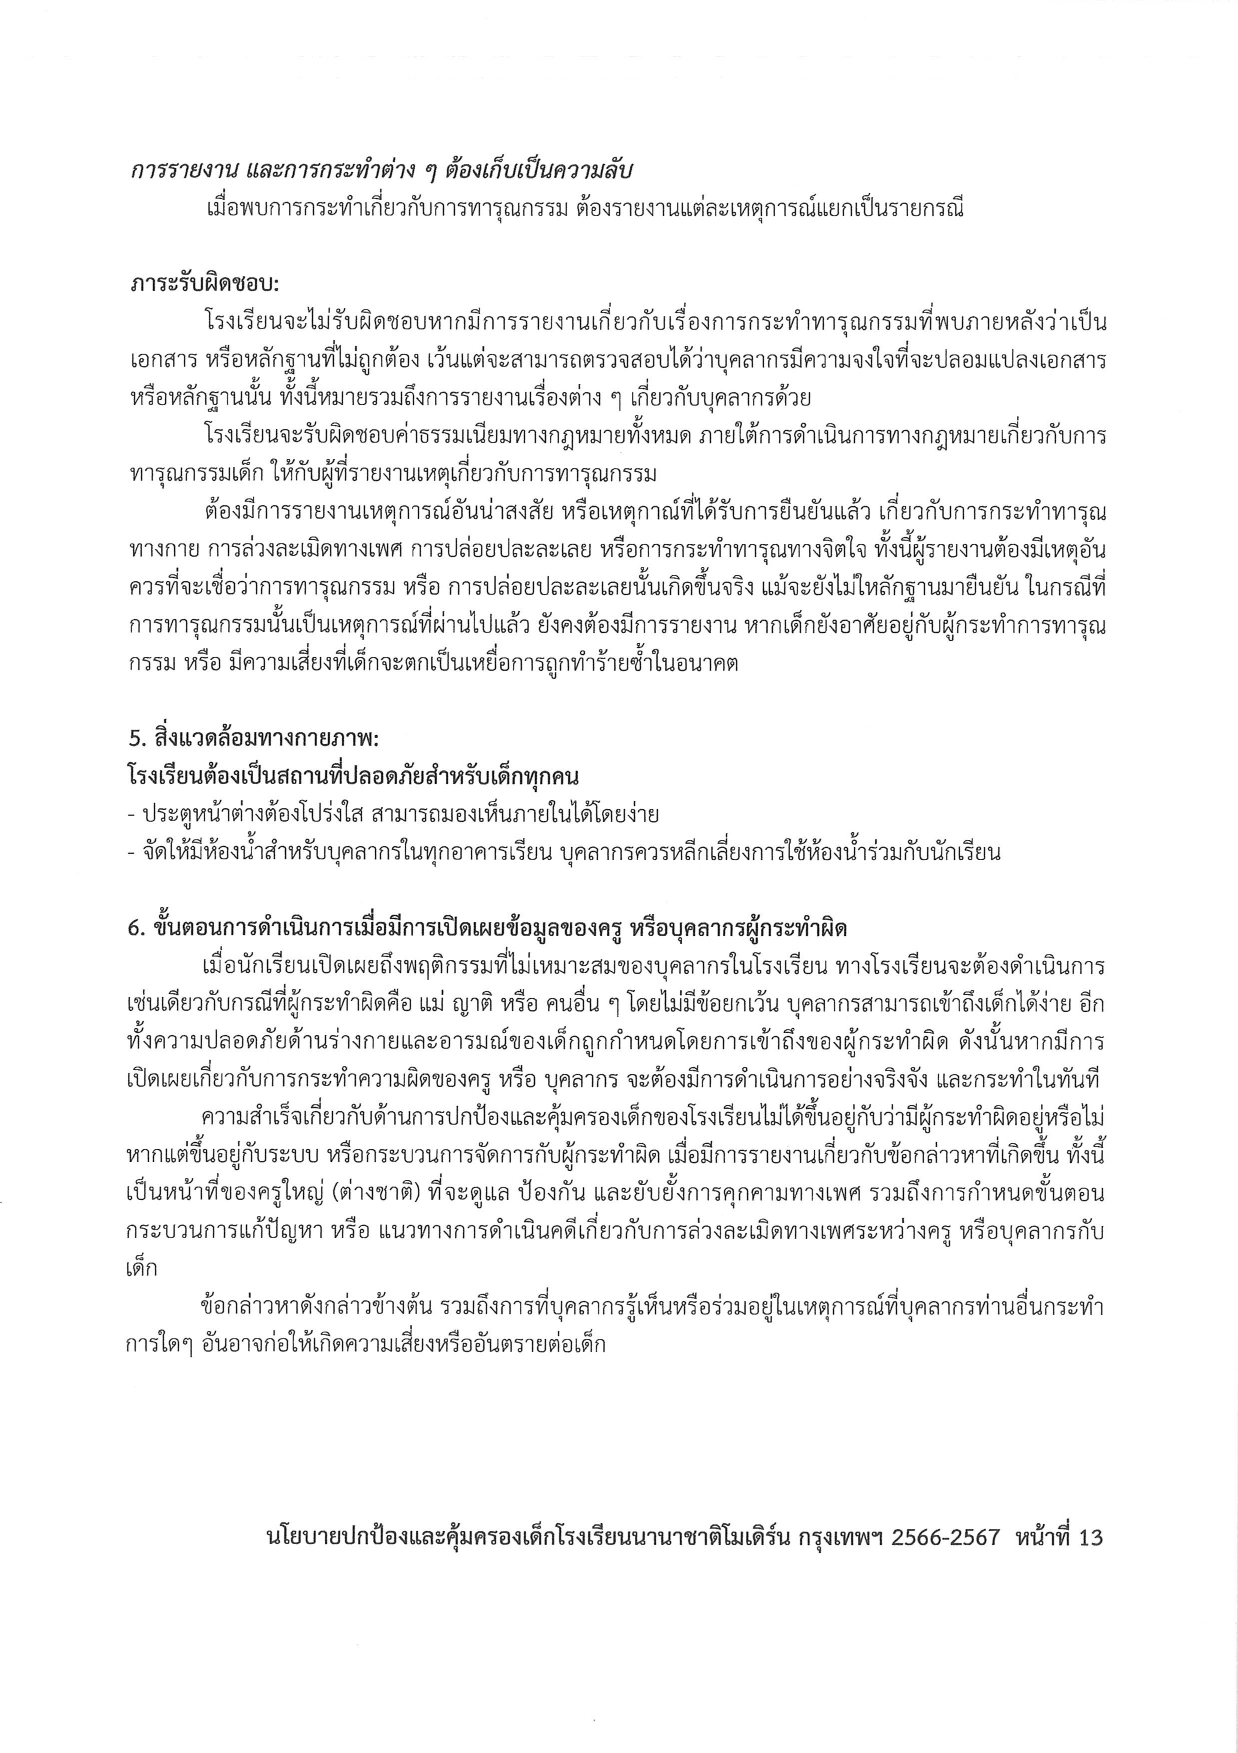 Child Protection Policy 2023 2024 Thai page 0013